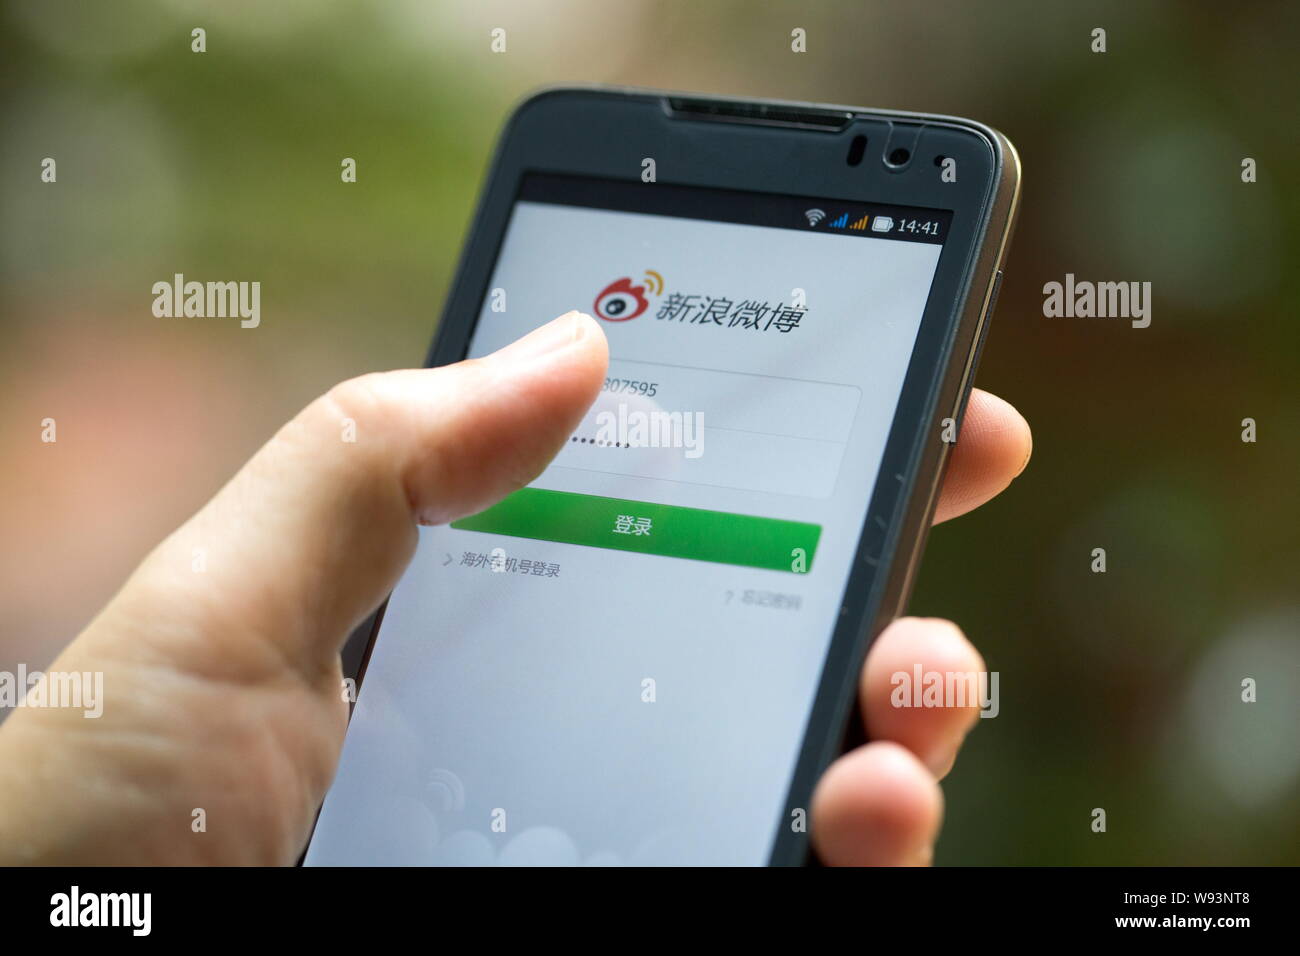 A Chinese woman uses Weibo, the Twitter-like microblogging service of Sina.com, on her smartphone in Guangzhou city, south Chinas  Guangdong province, Stock Photo